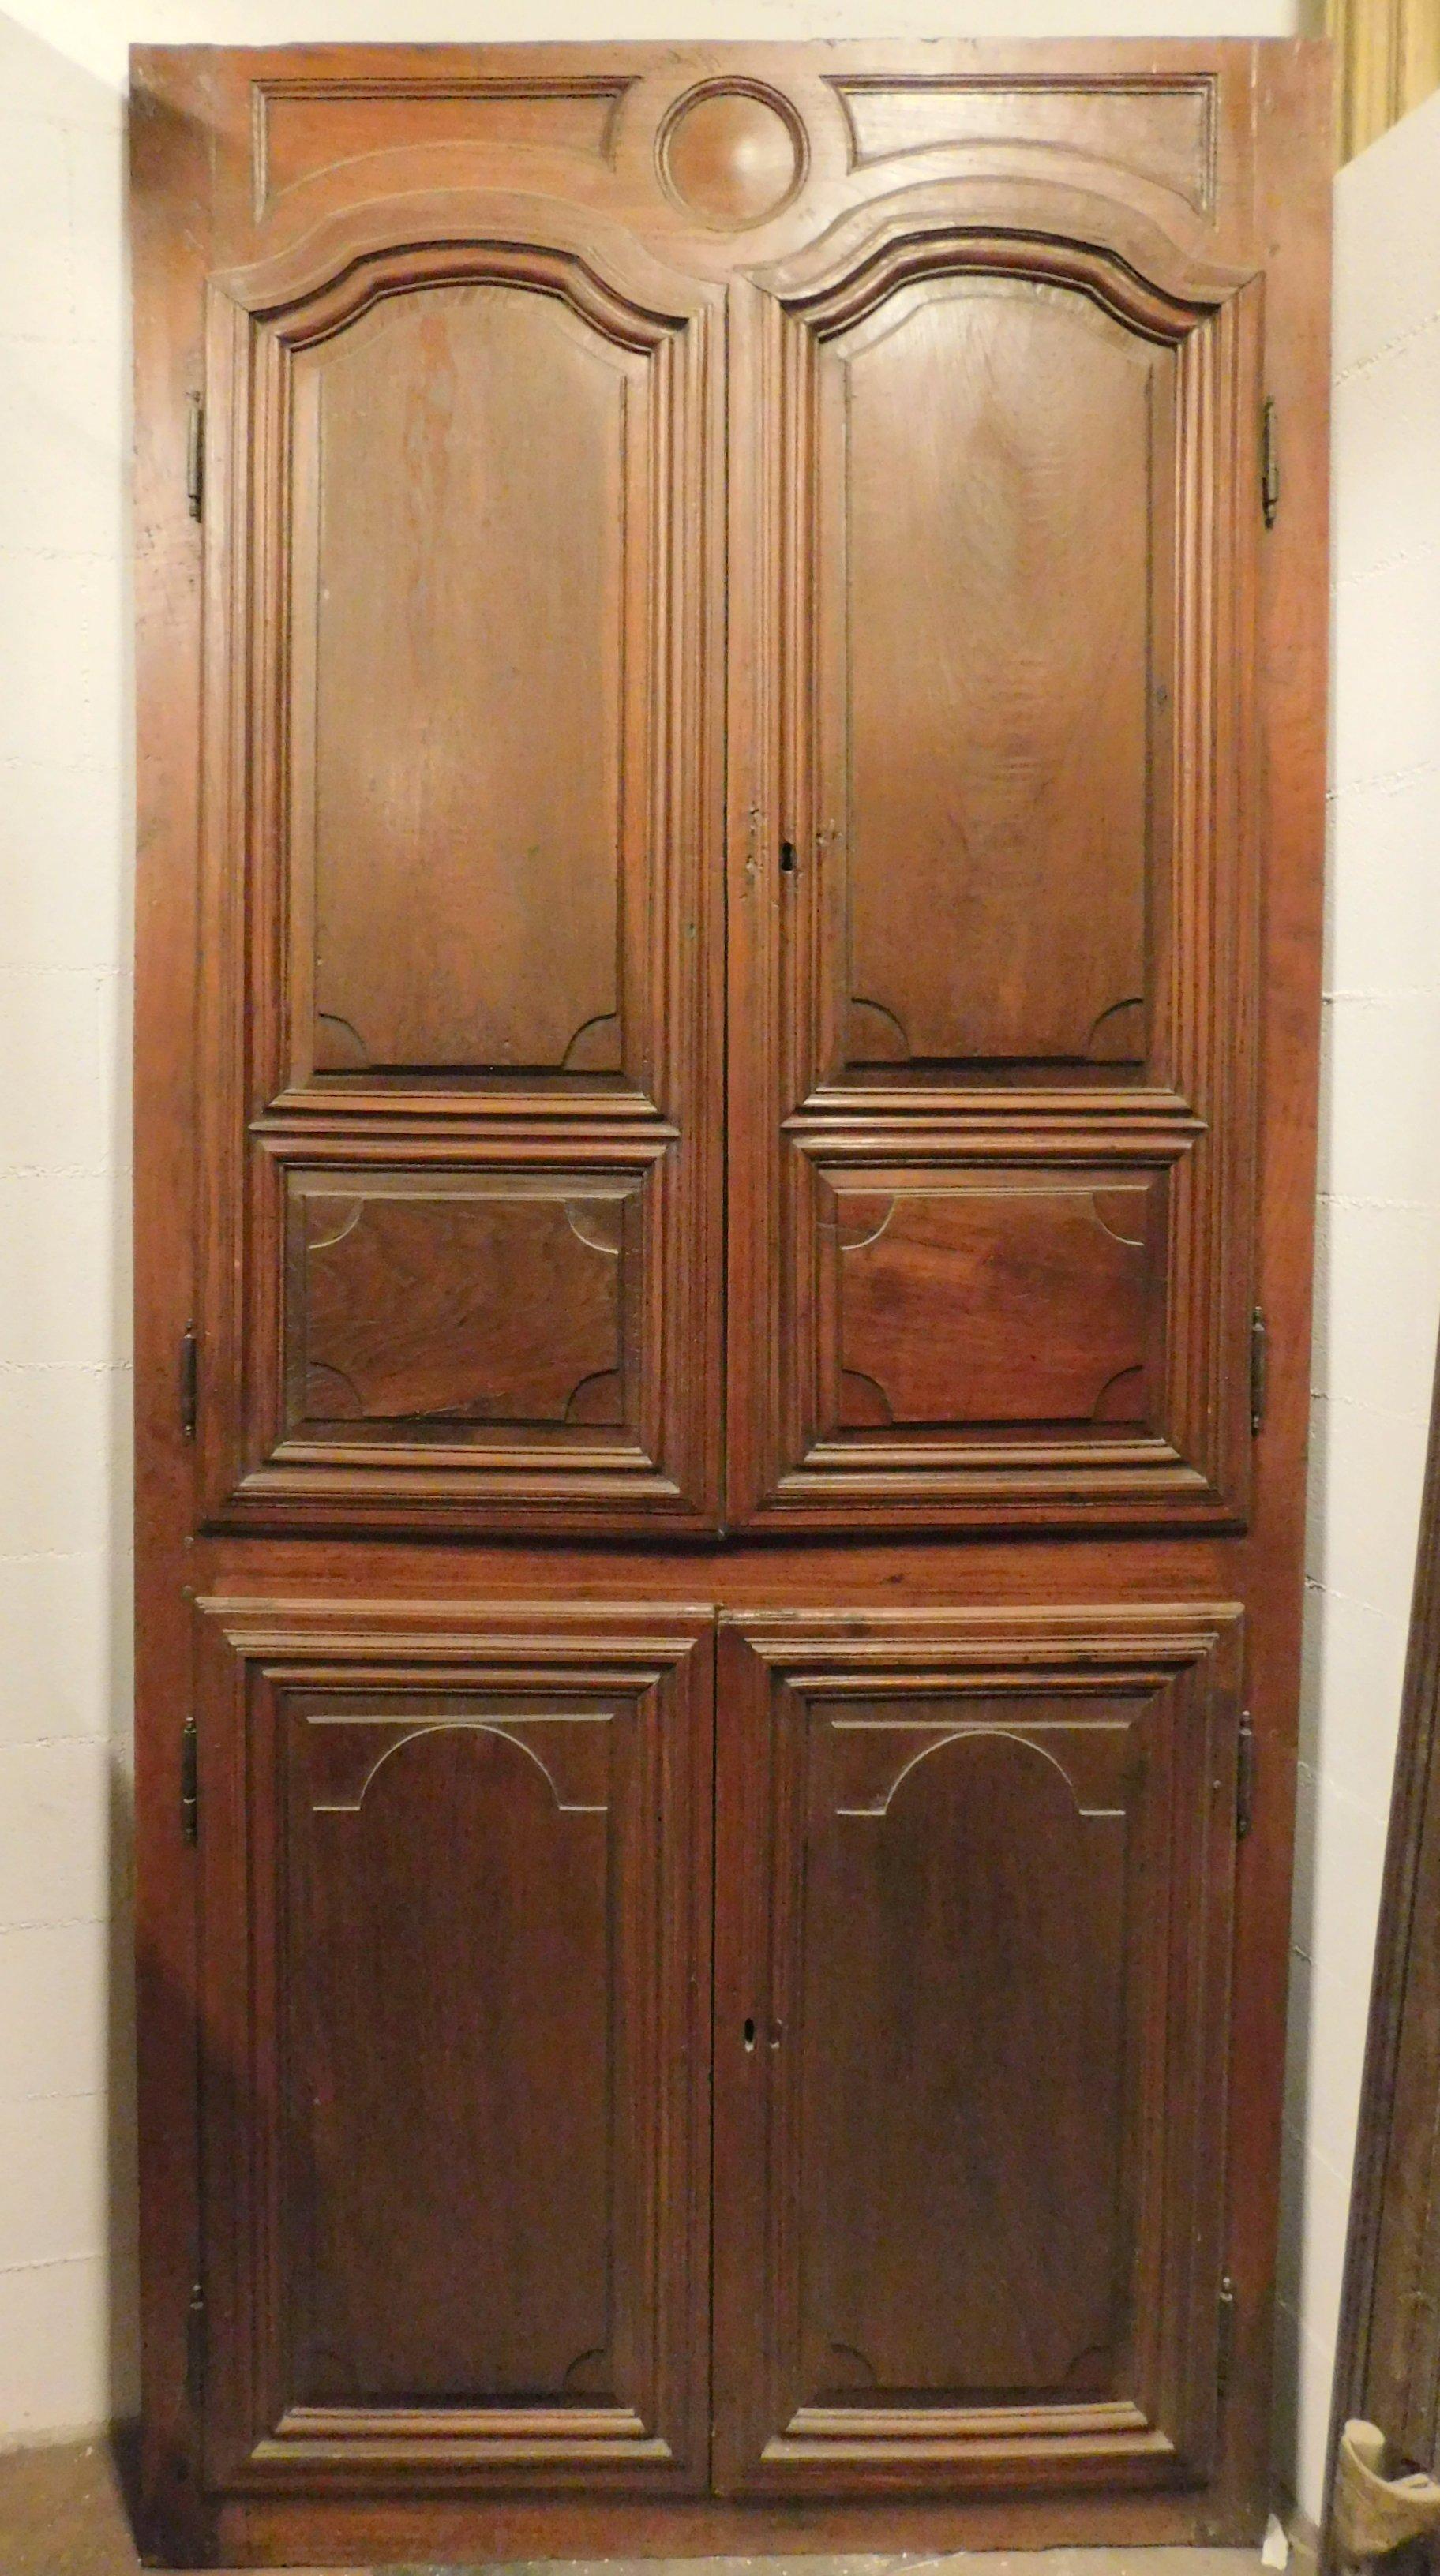 Antique Wall Cabinet Door Placard Carved Walnut, Four Doors, 18th Century, Italy For Sale 1